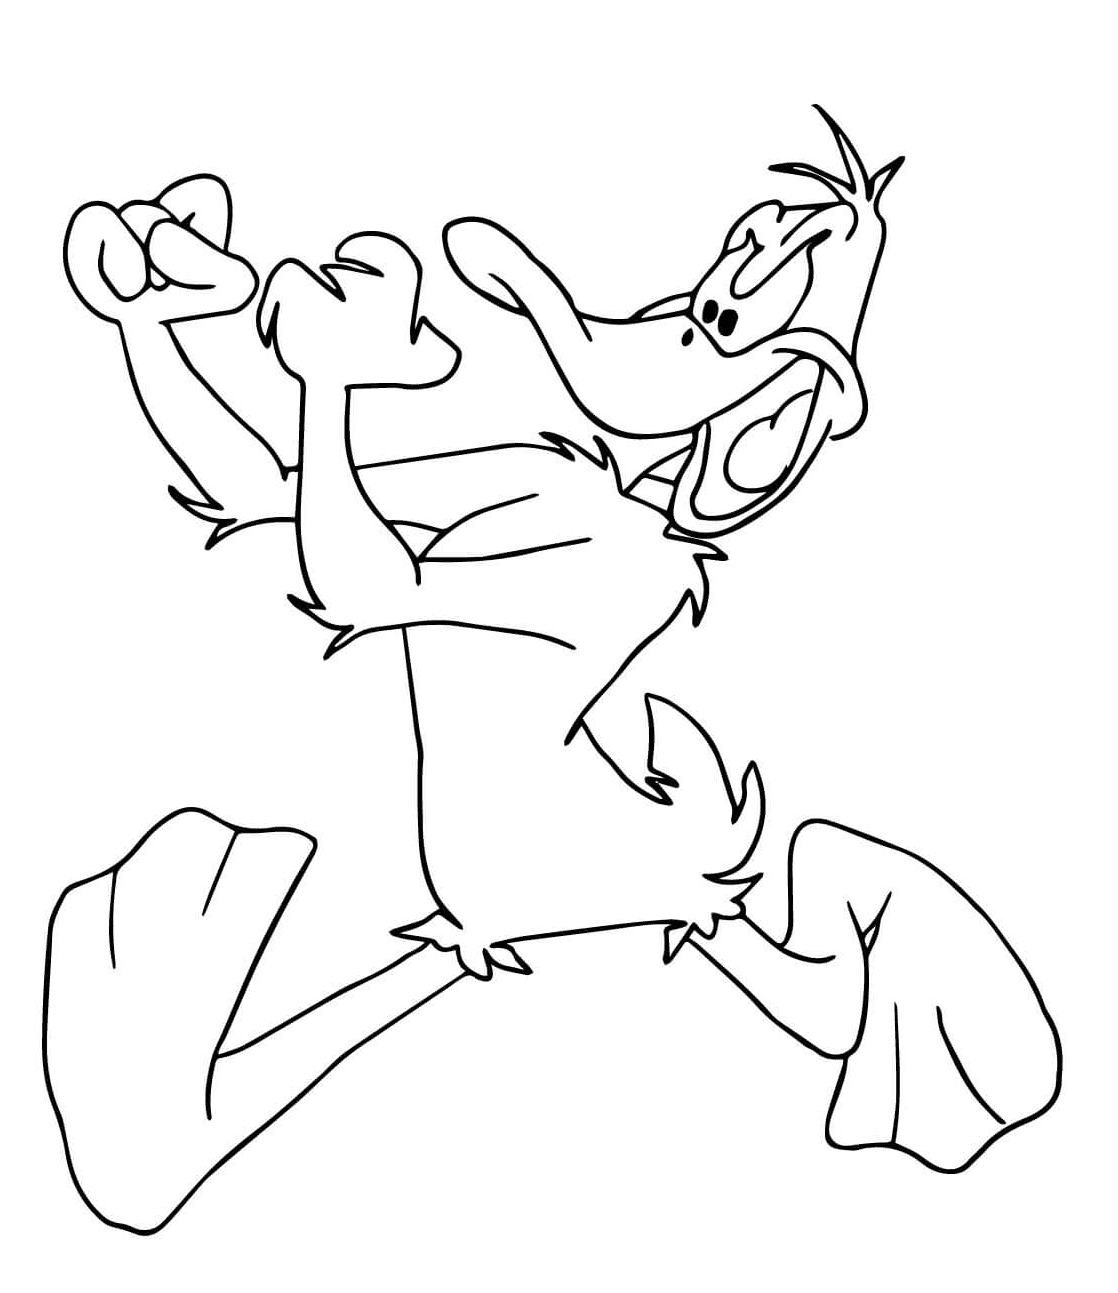 Daffy Duck Ready for a Fight Coloring Pages